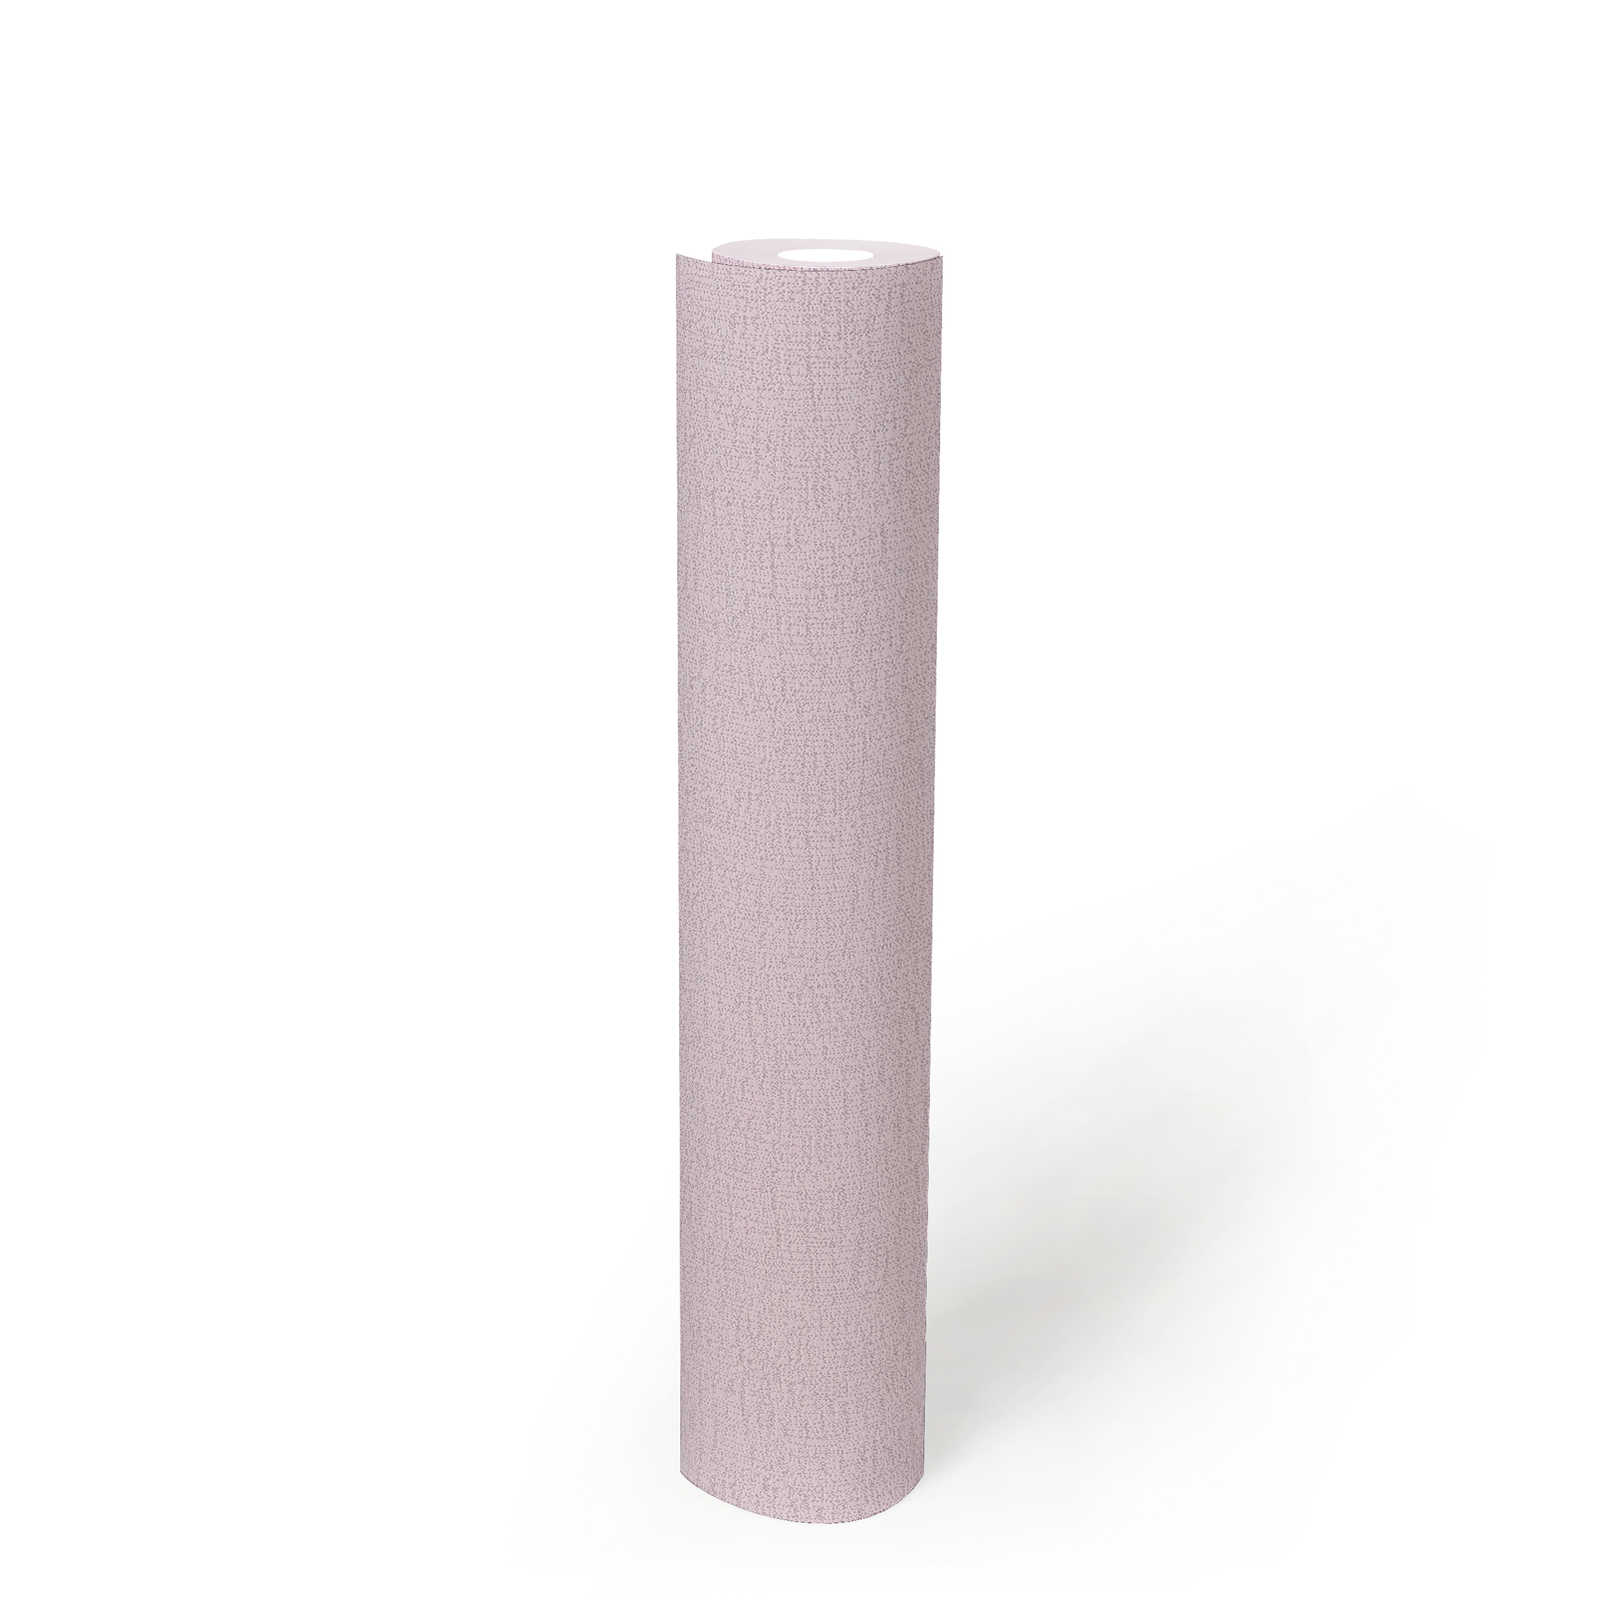             Non-woven wallpaper pink for girls & Nursery - pink
        